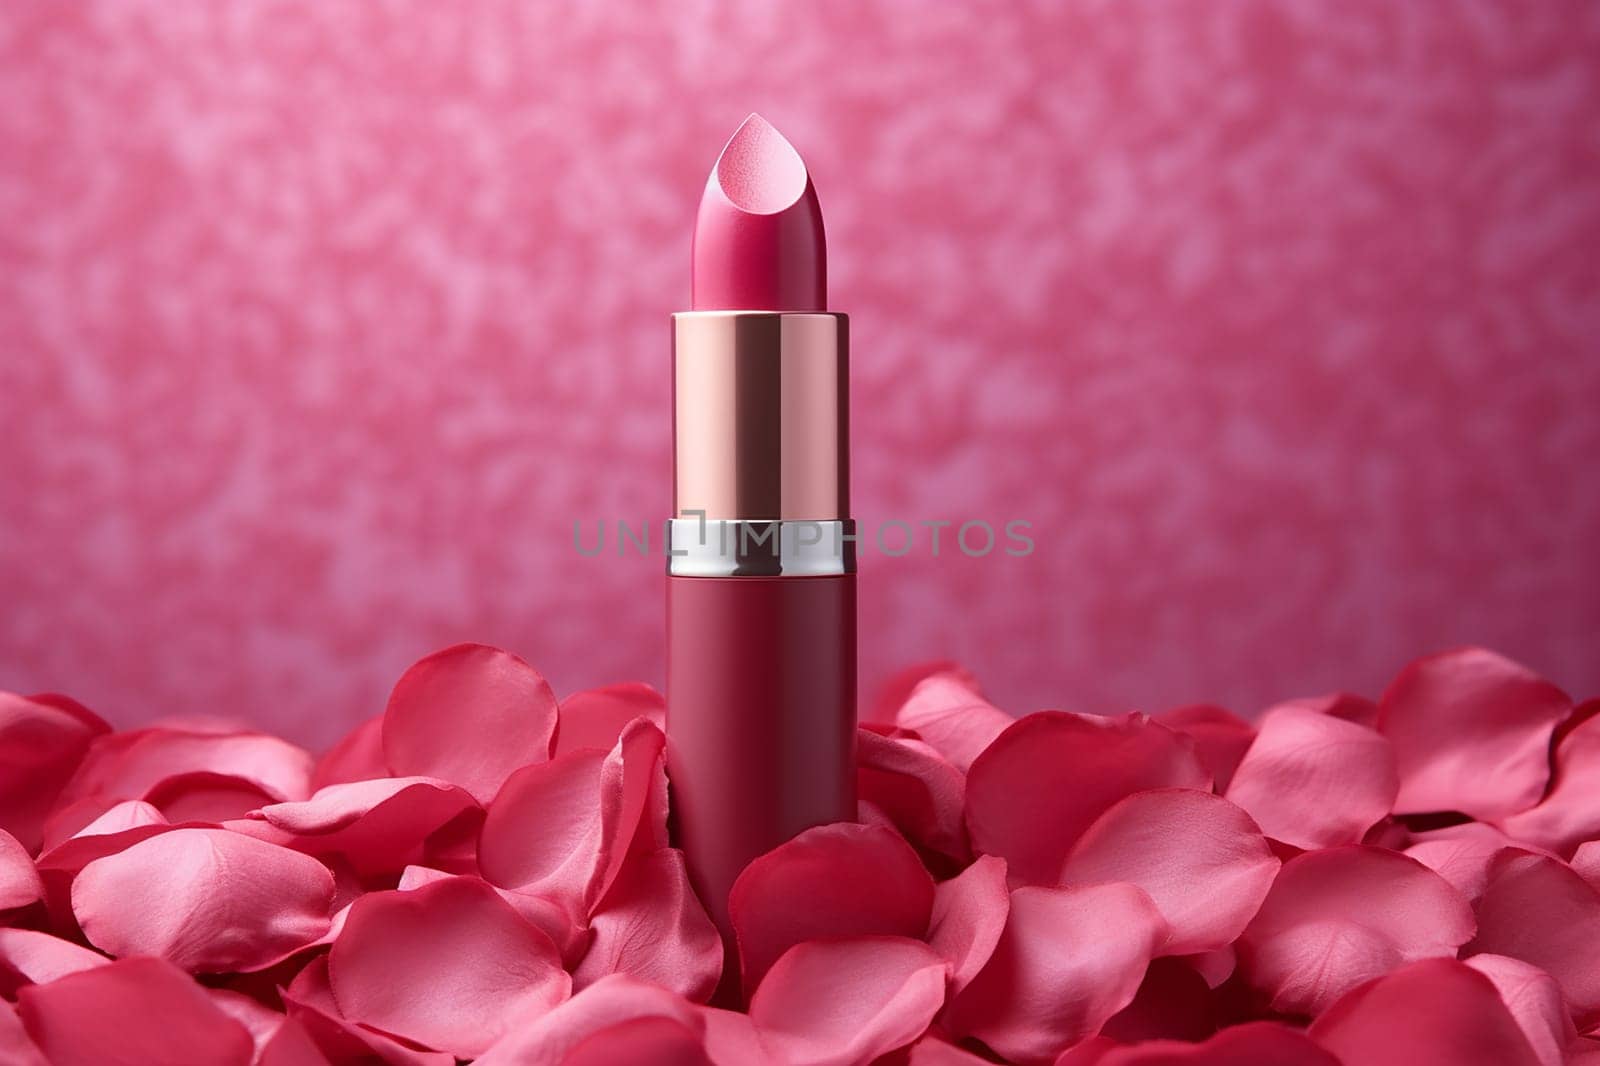 Close-up of a lipstick on a bed of rose petals. by Hype2art